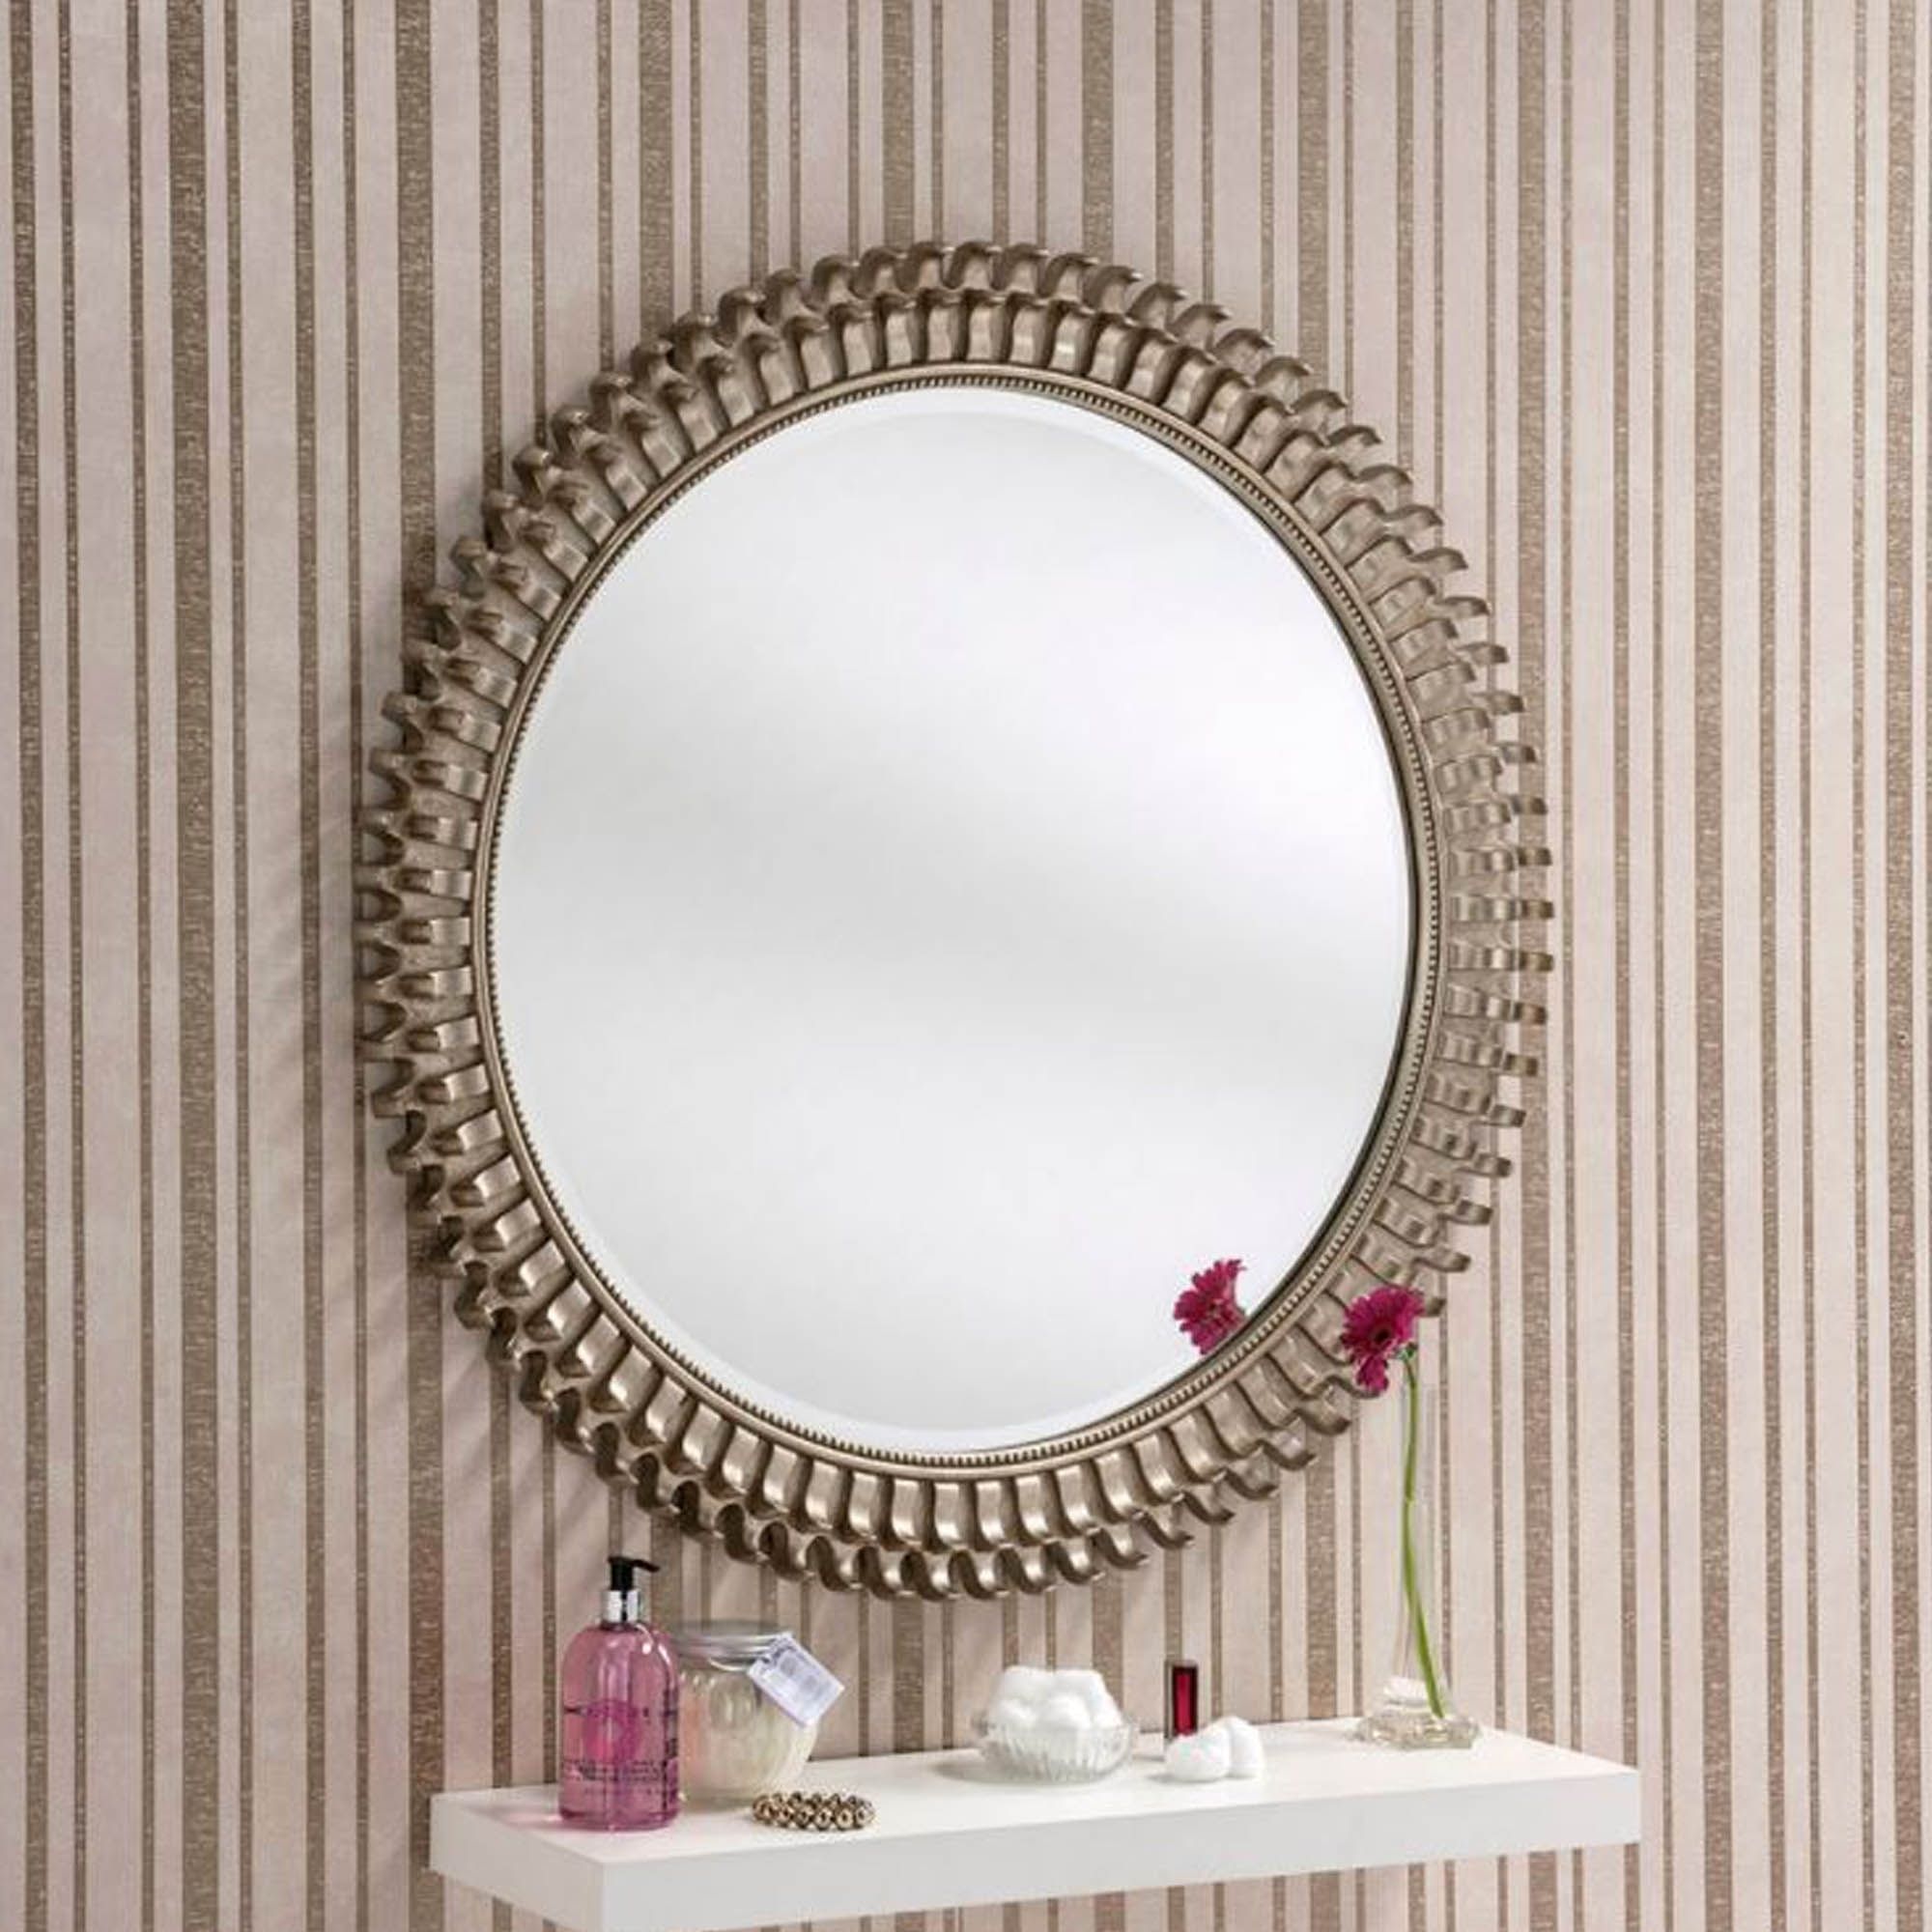 Round Contemporary Antique Silver Wall Mirror | Homesdirect365 Within Antiqued Silver Quatrefoil Wall Mirrors (View 6 of 15)